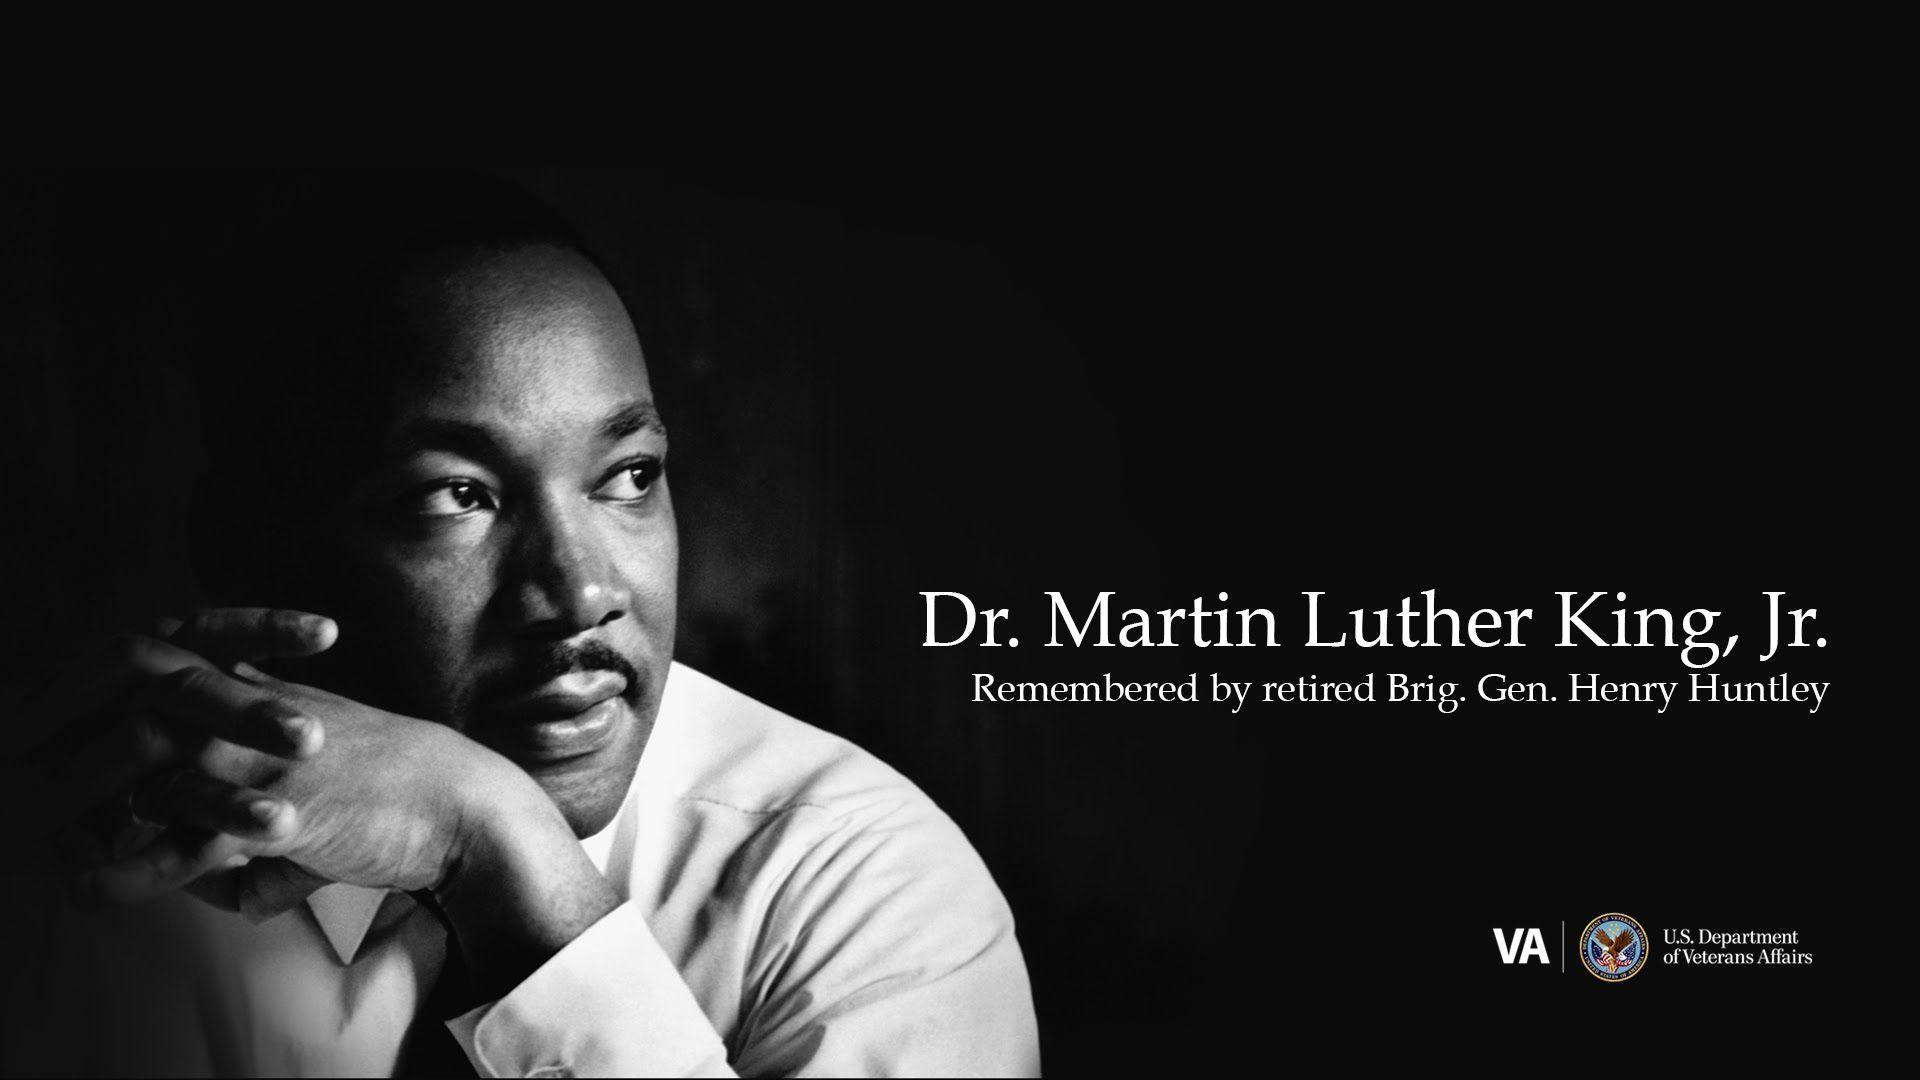 Remembering Dr. Martin Luther King, Jr